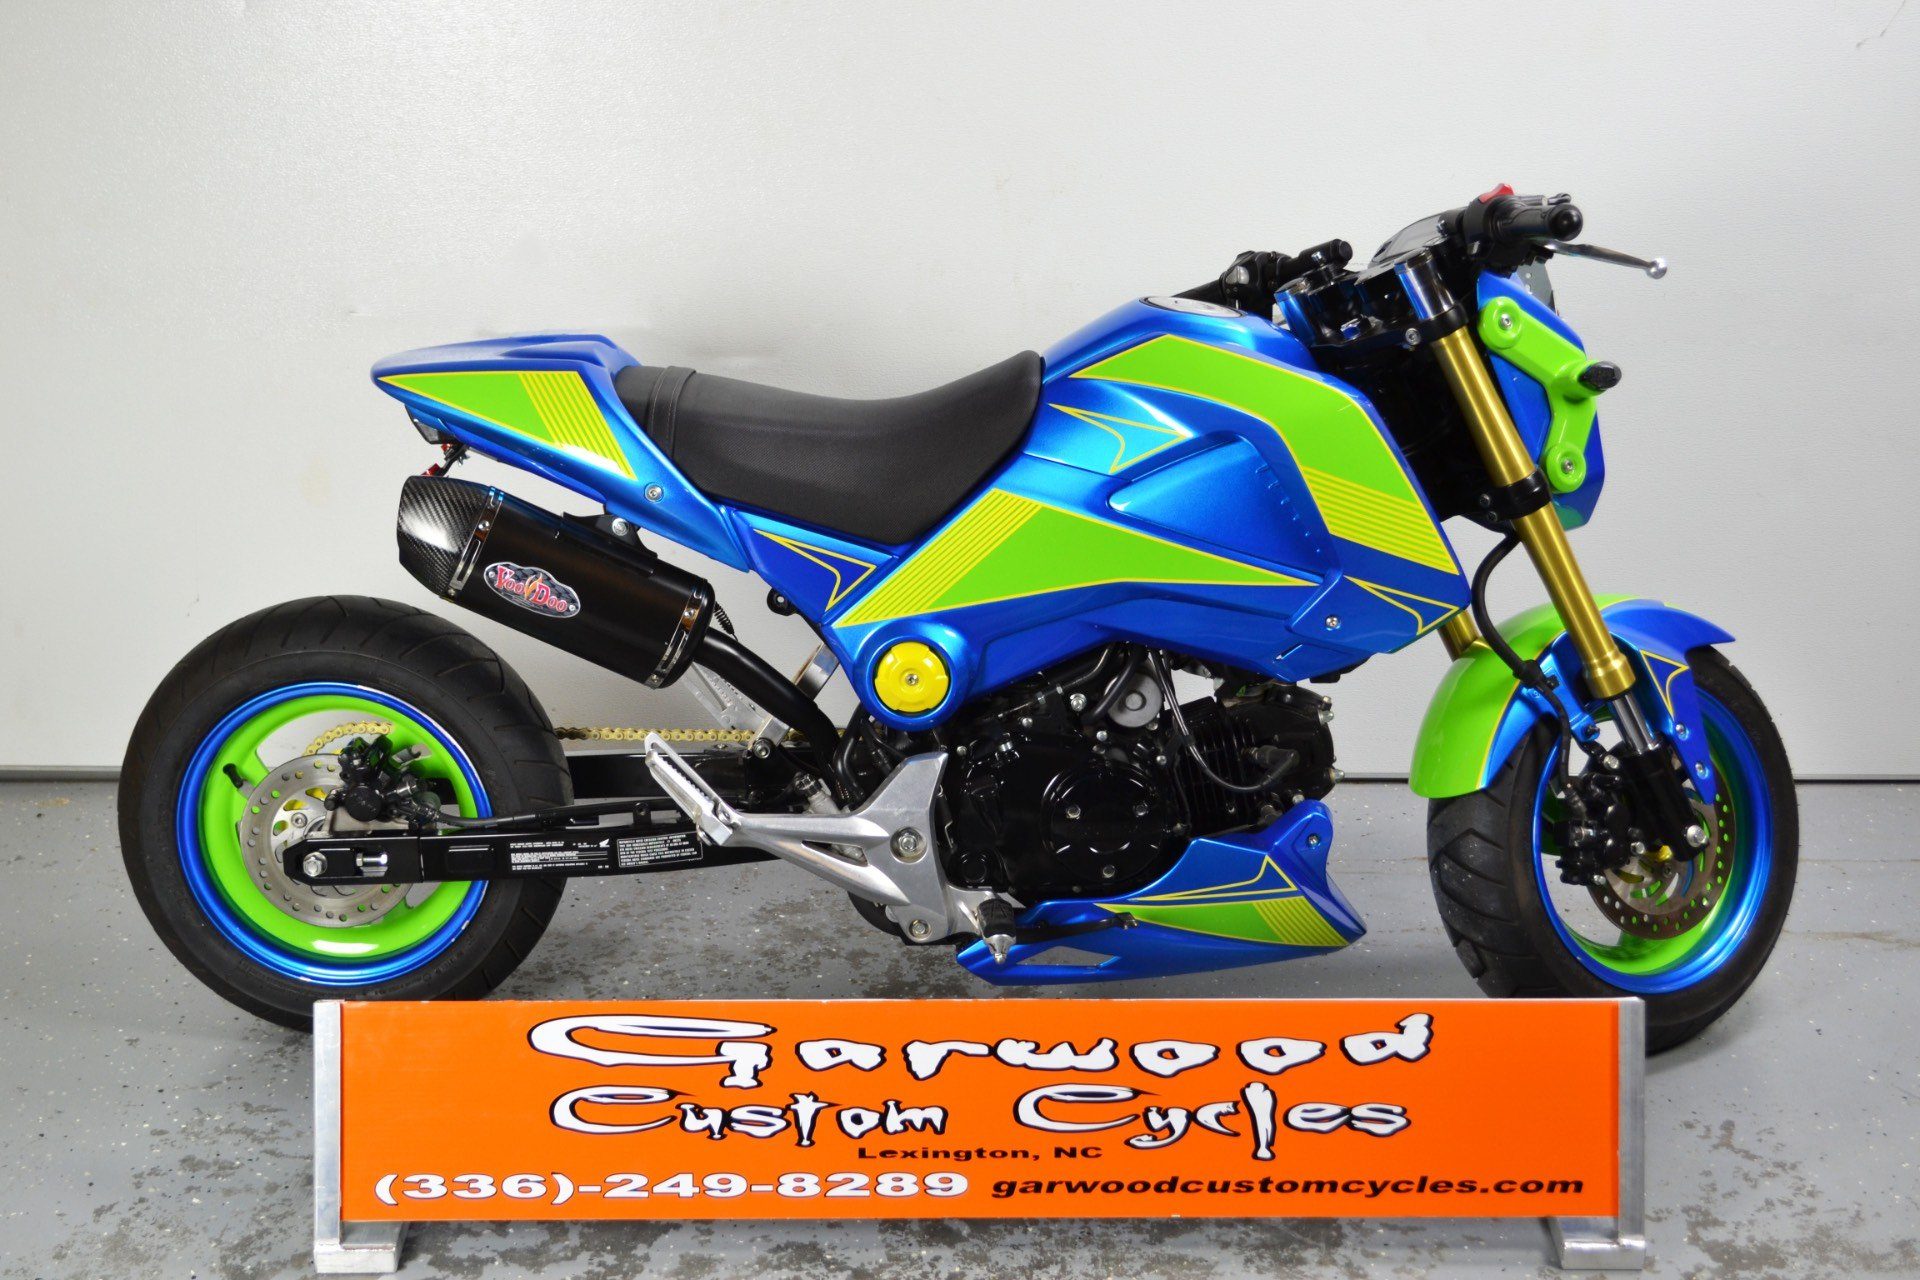 Used 2014 Honda Grom 125 Motorcycles In Lexington Nc Stock Number 004808 500cc